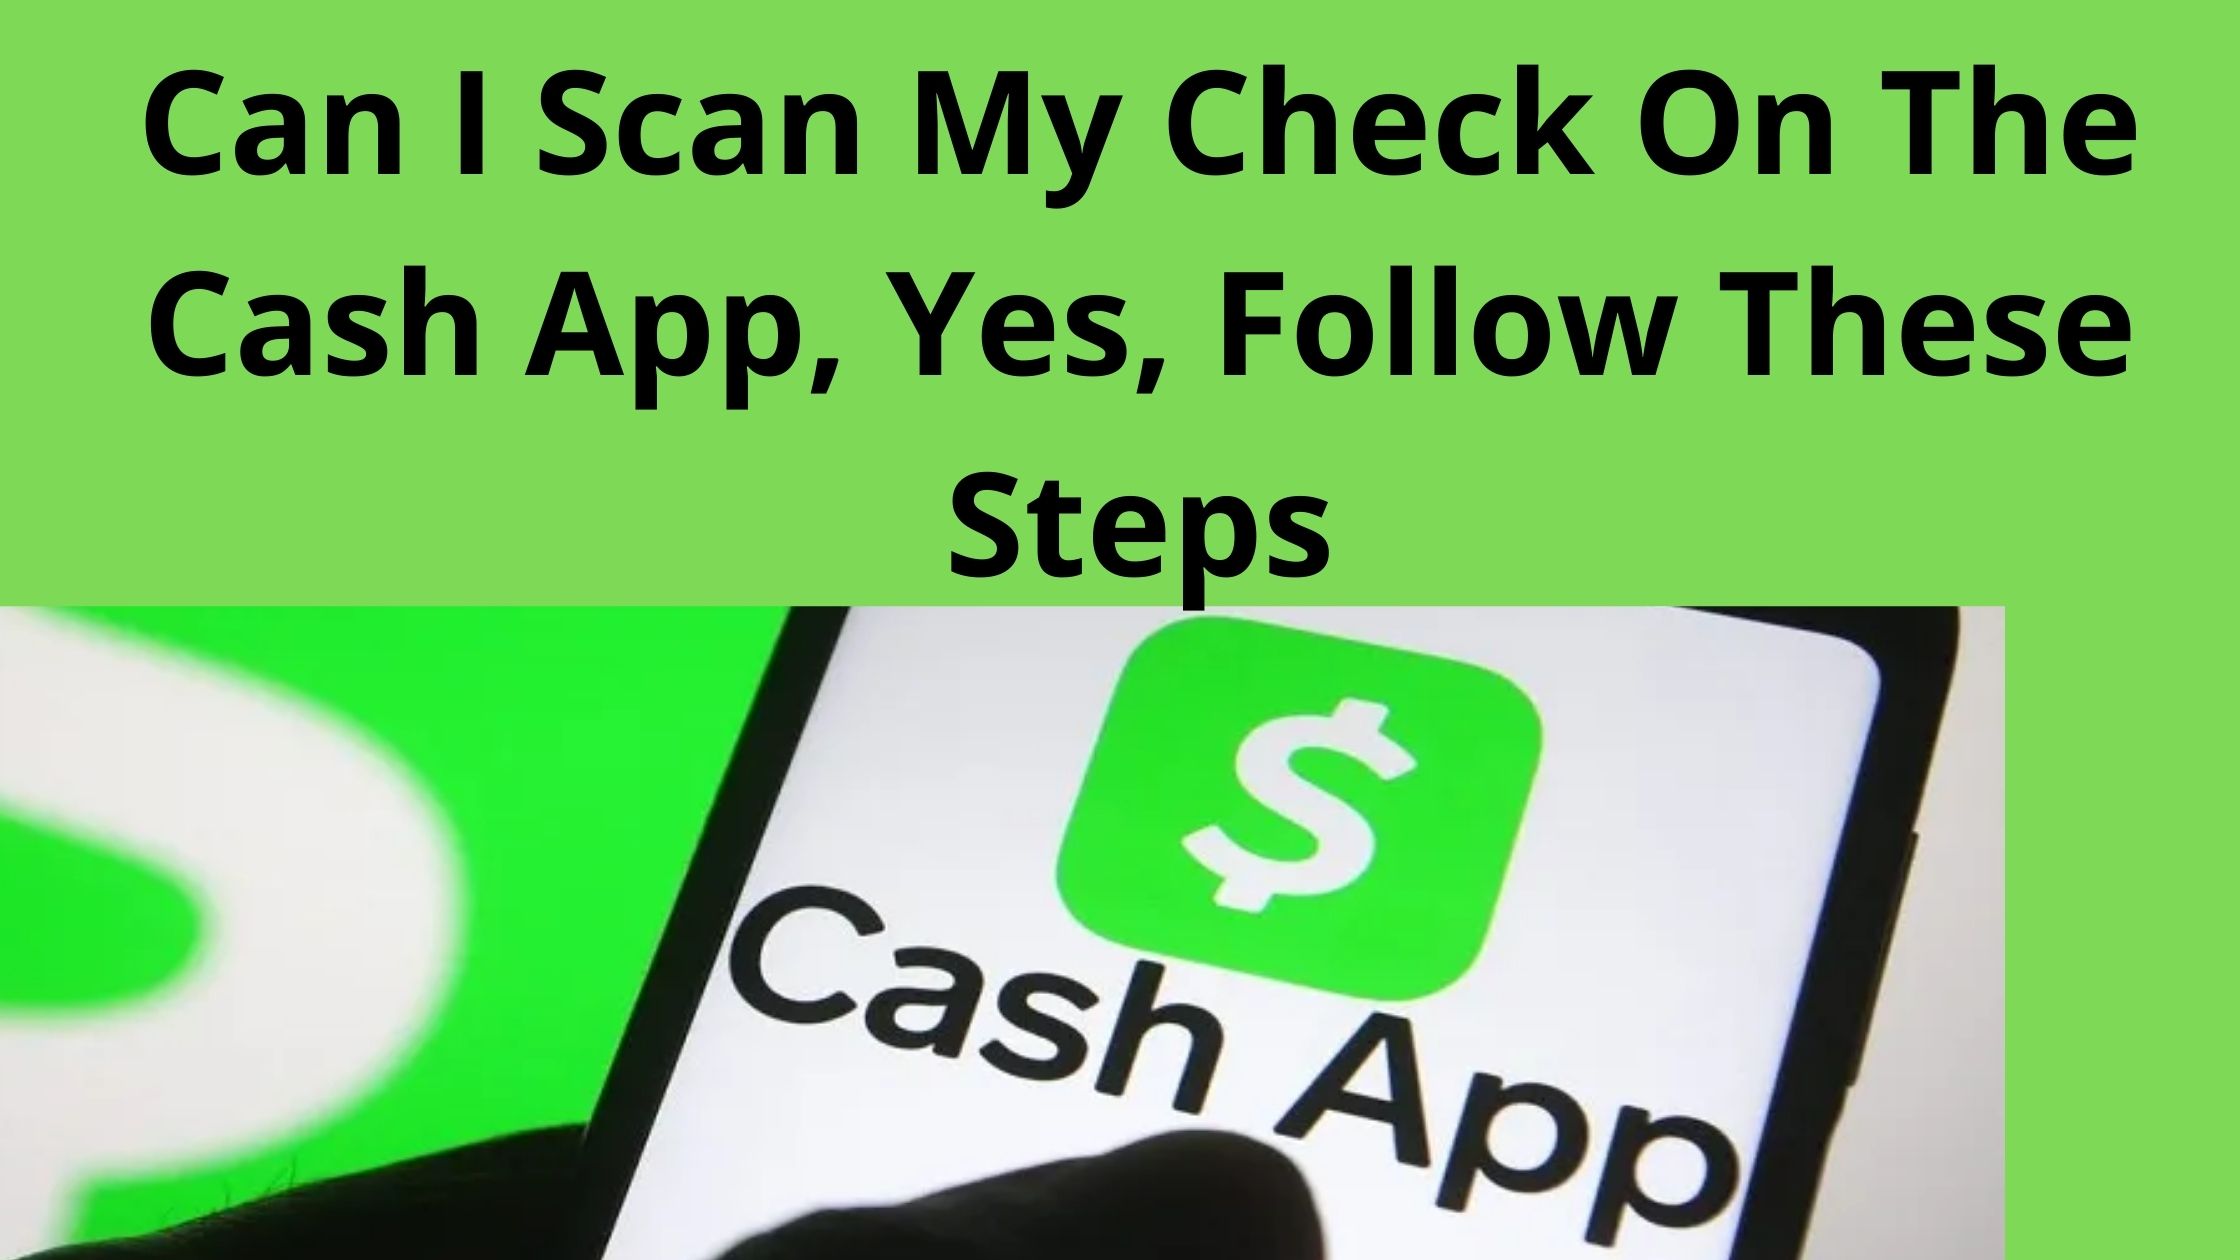 Can I Scan My Check On The Cash App, Yes, Follow These Steps